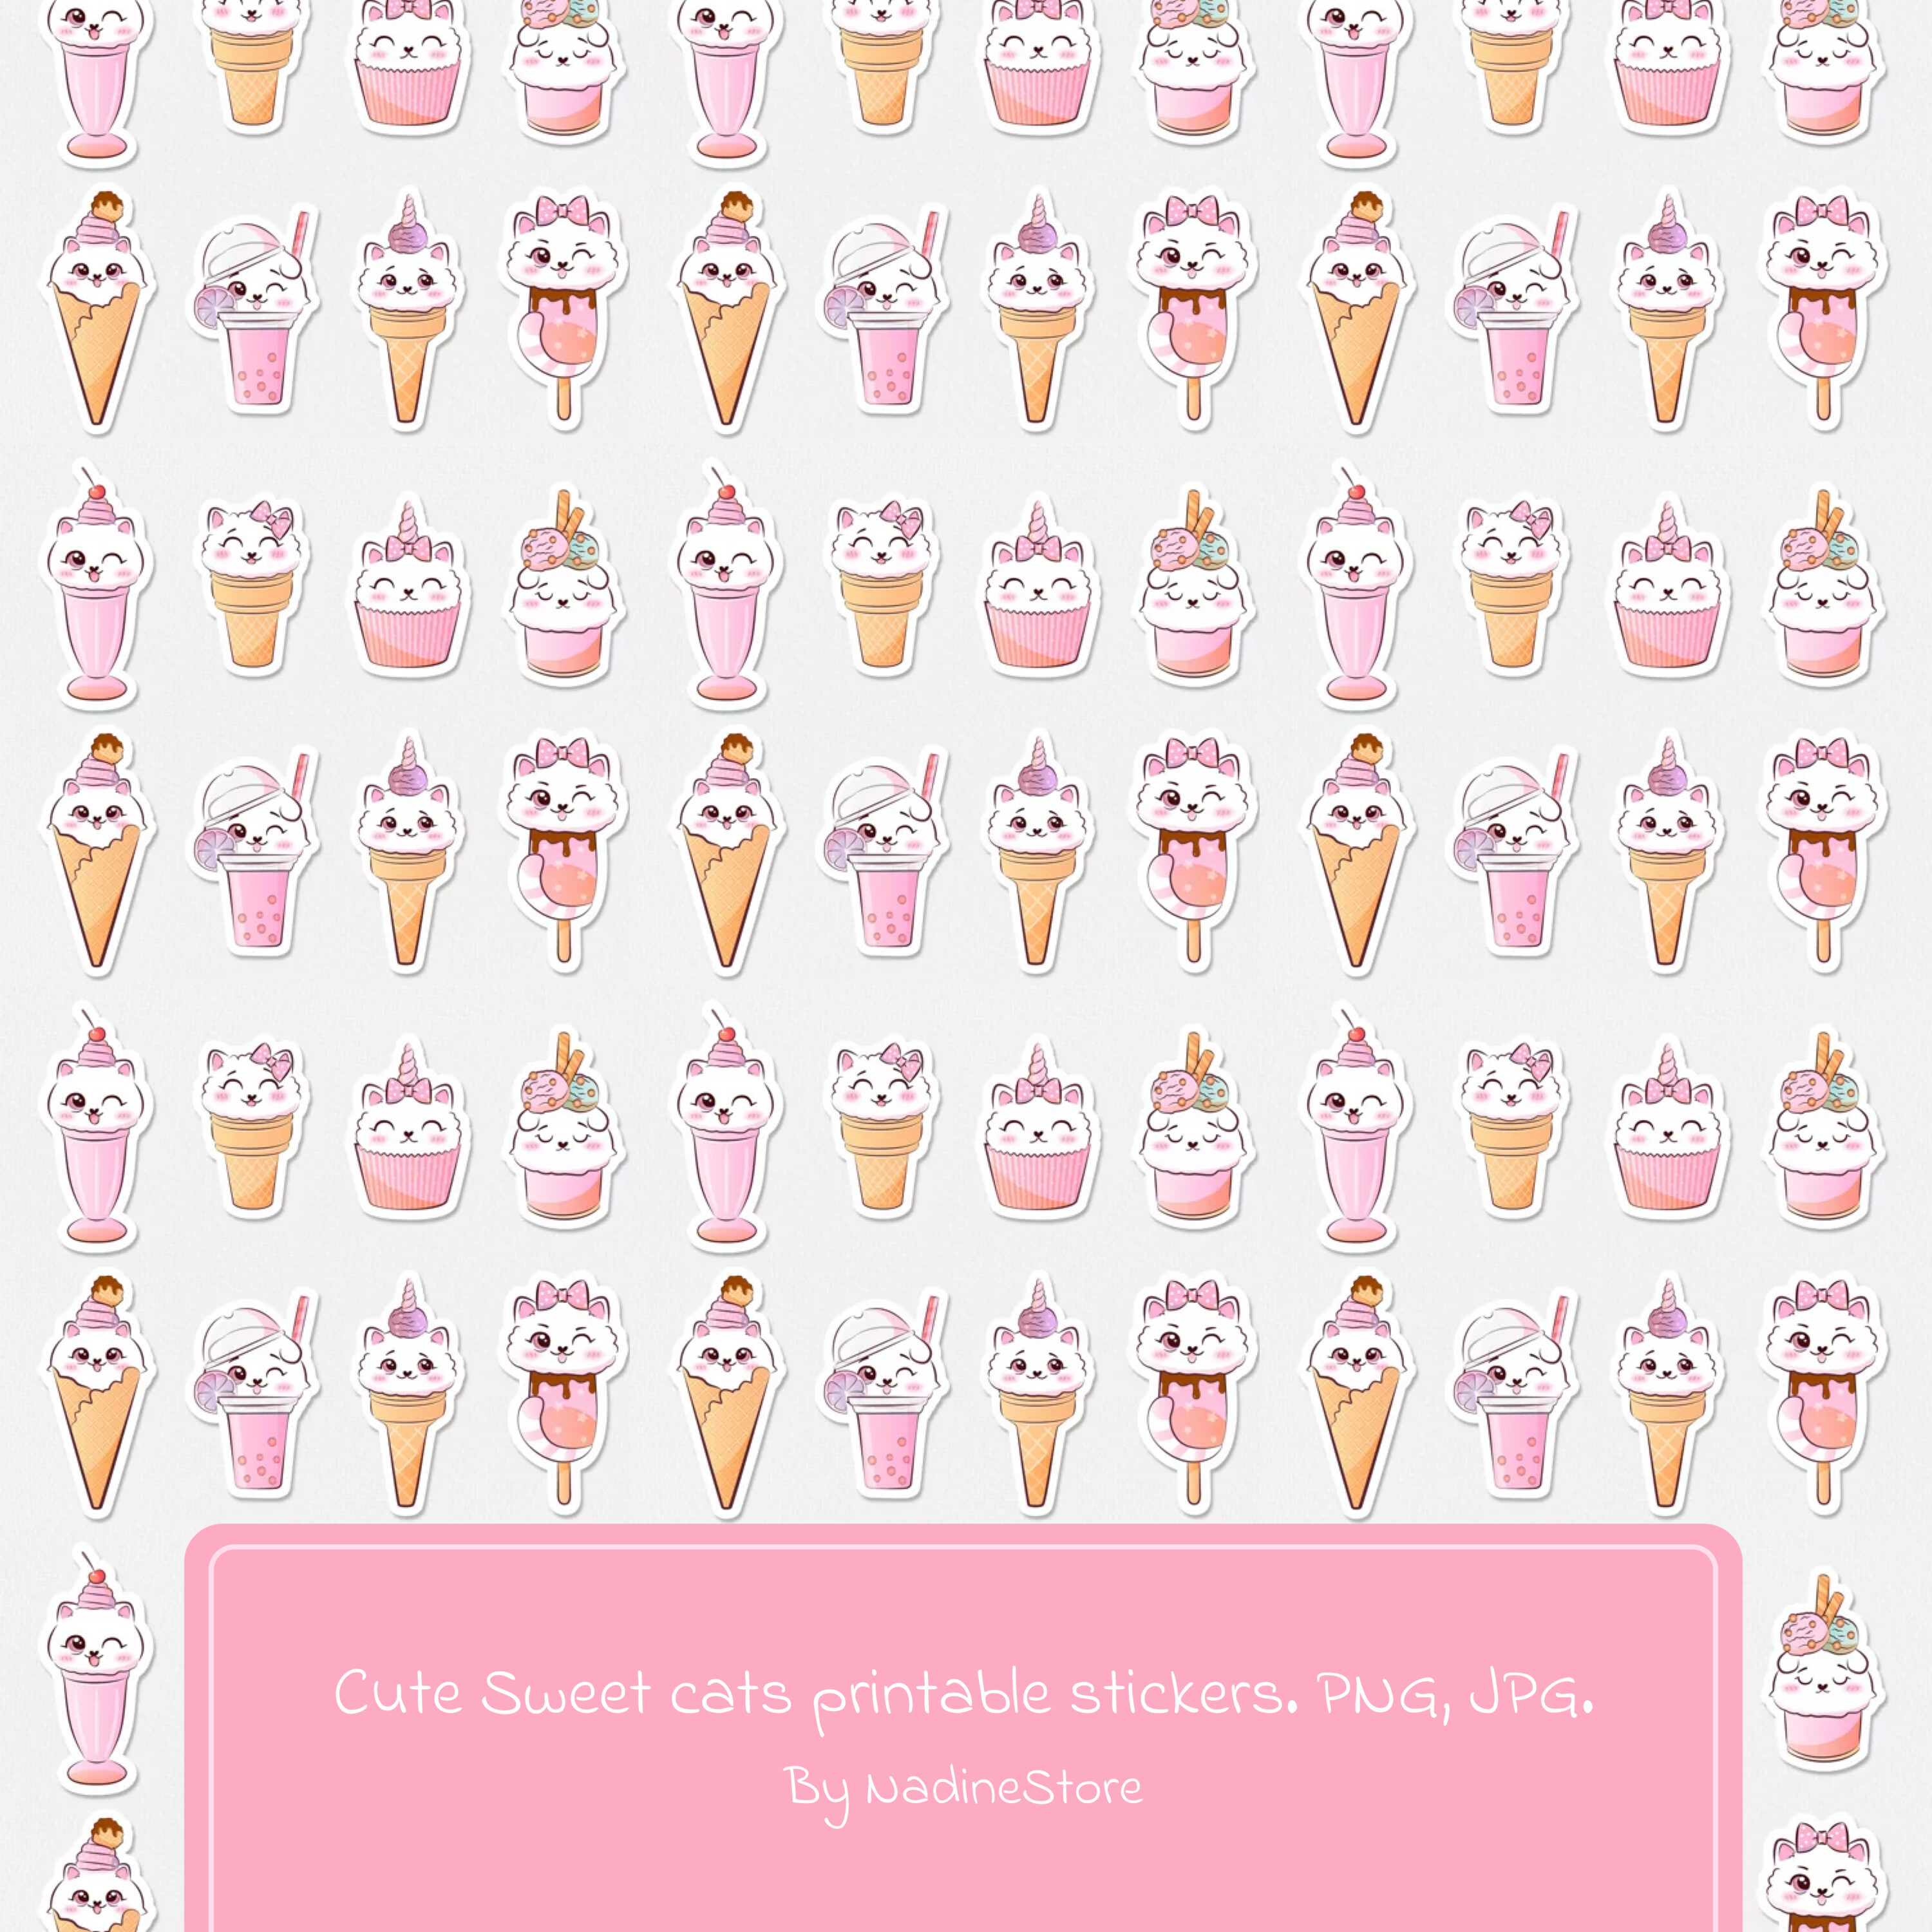 Prints of cute sweet cats printable stickers.